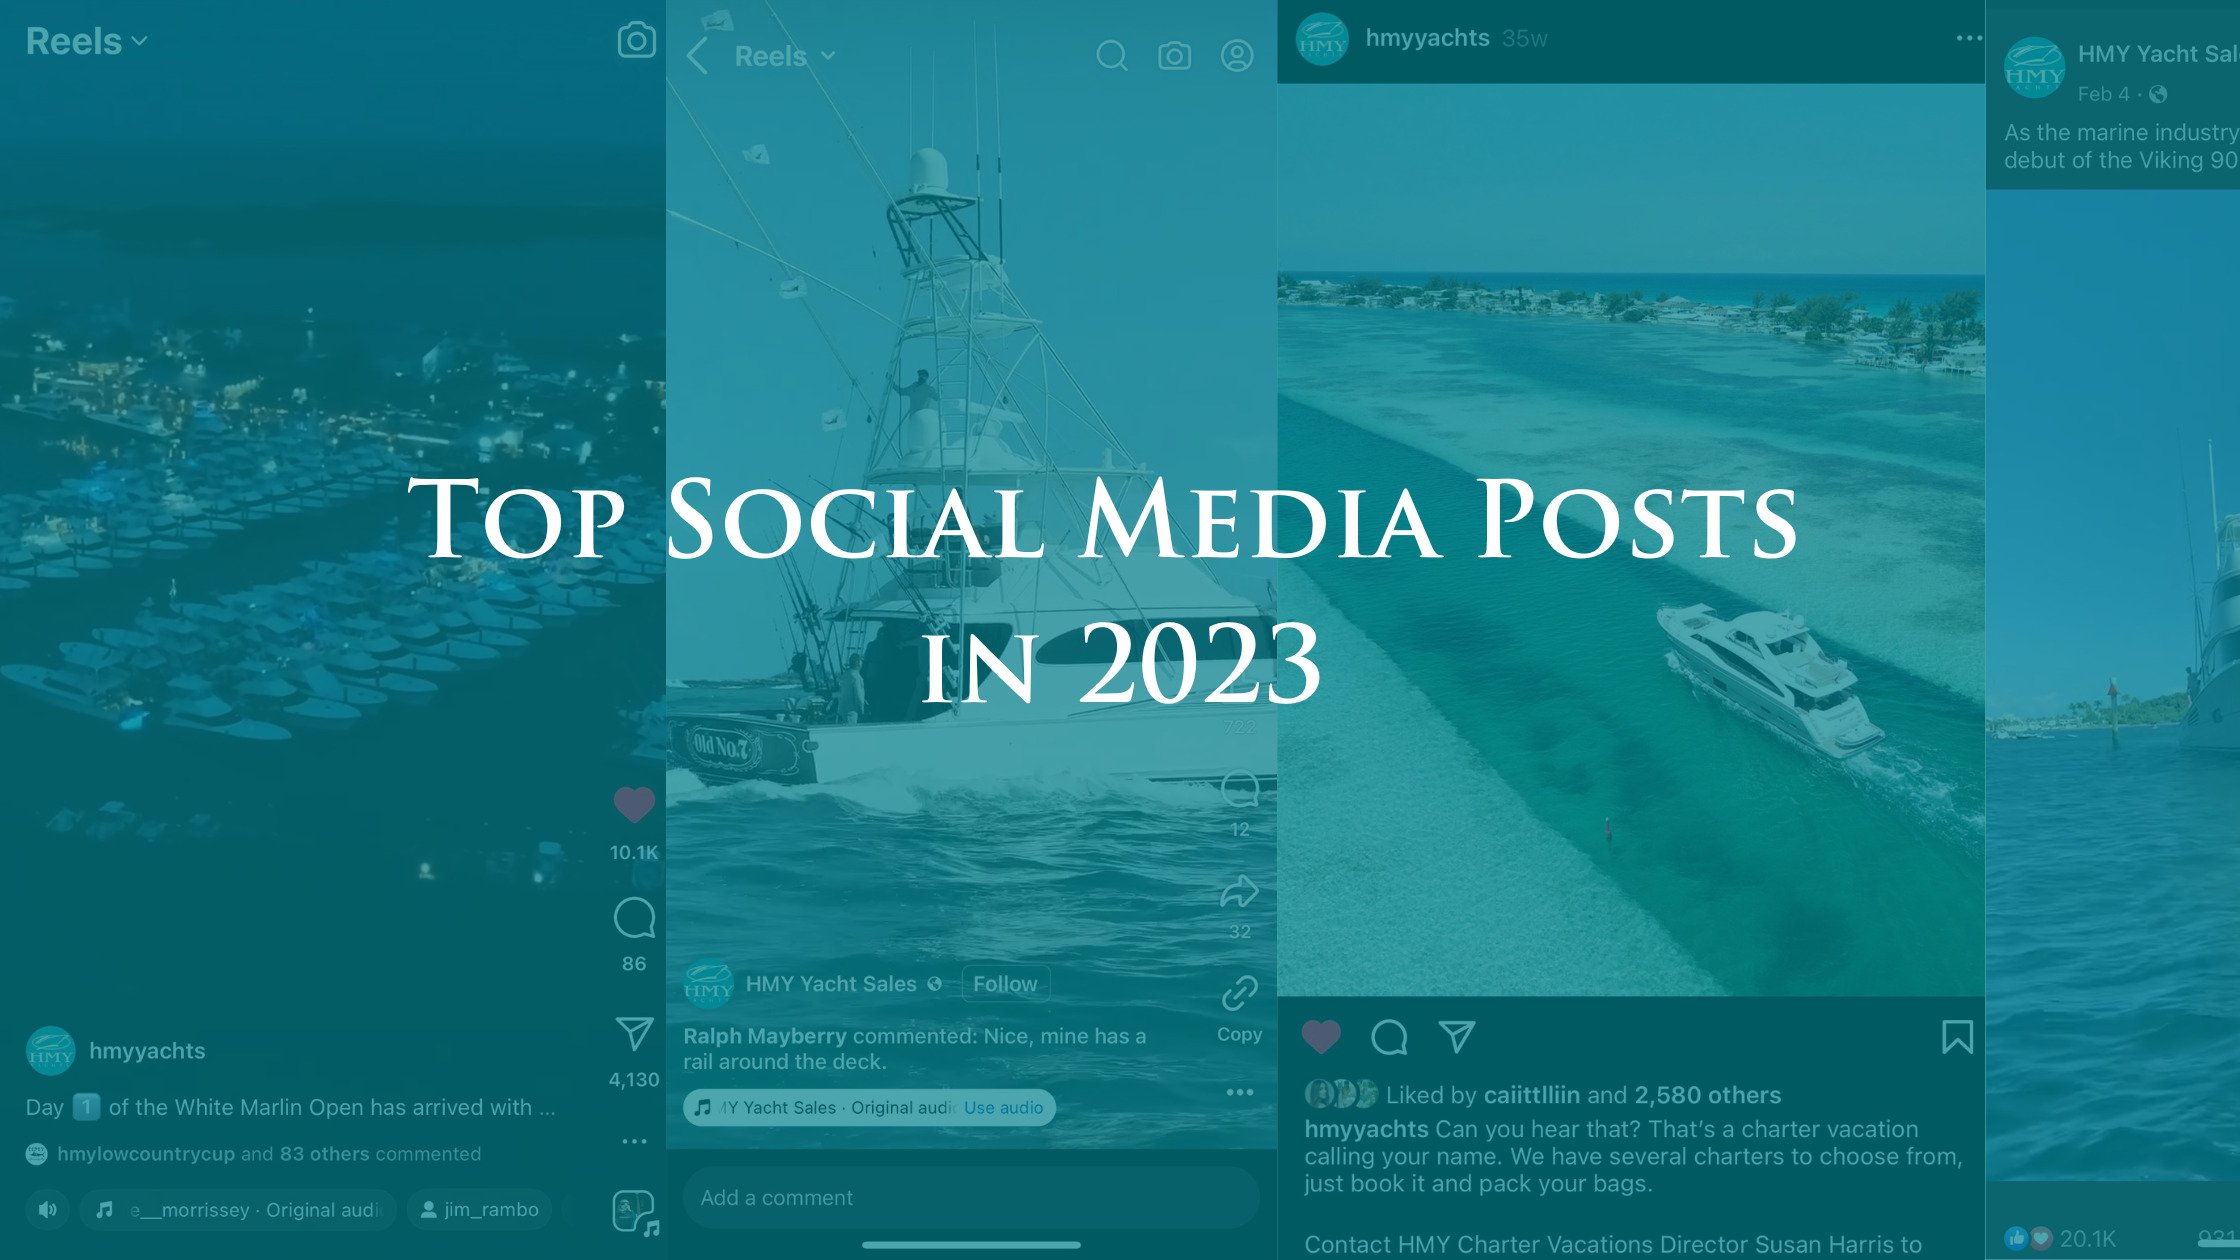 HMY Yacht Sales’ Top Posts of 2023